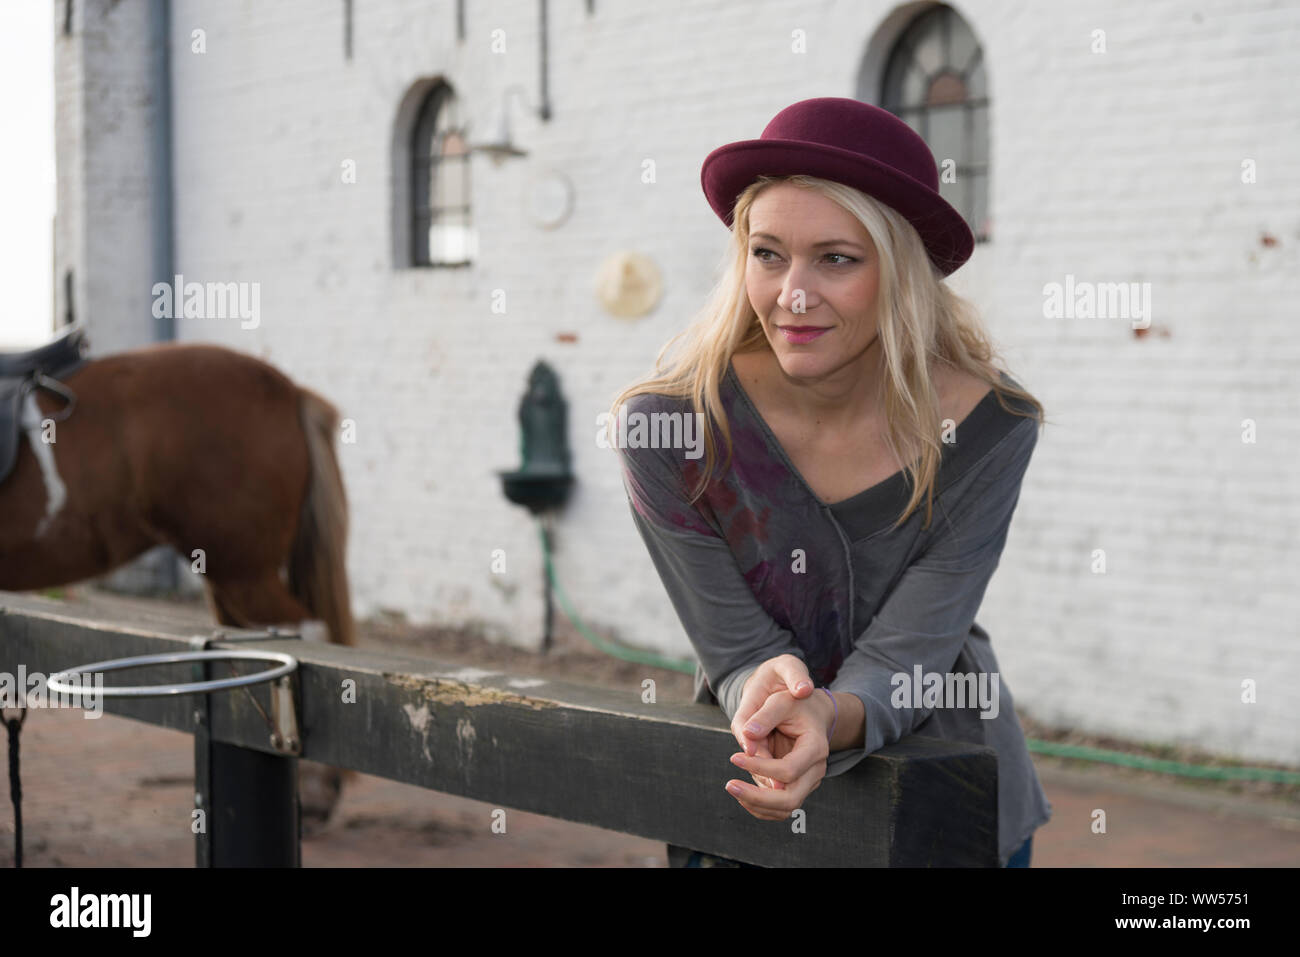 Woman with hat leaning on fence, horse in the background Stock Photo